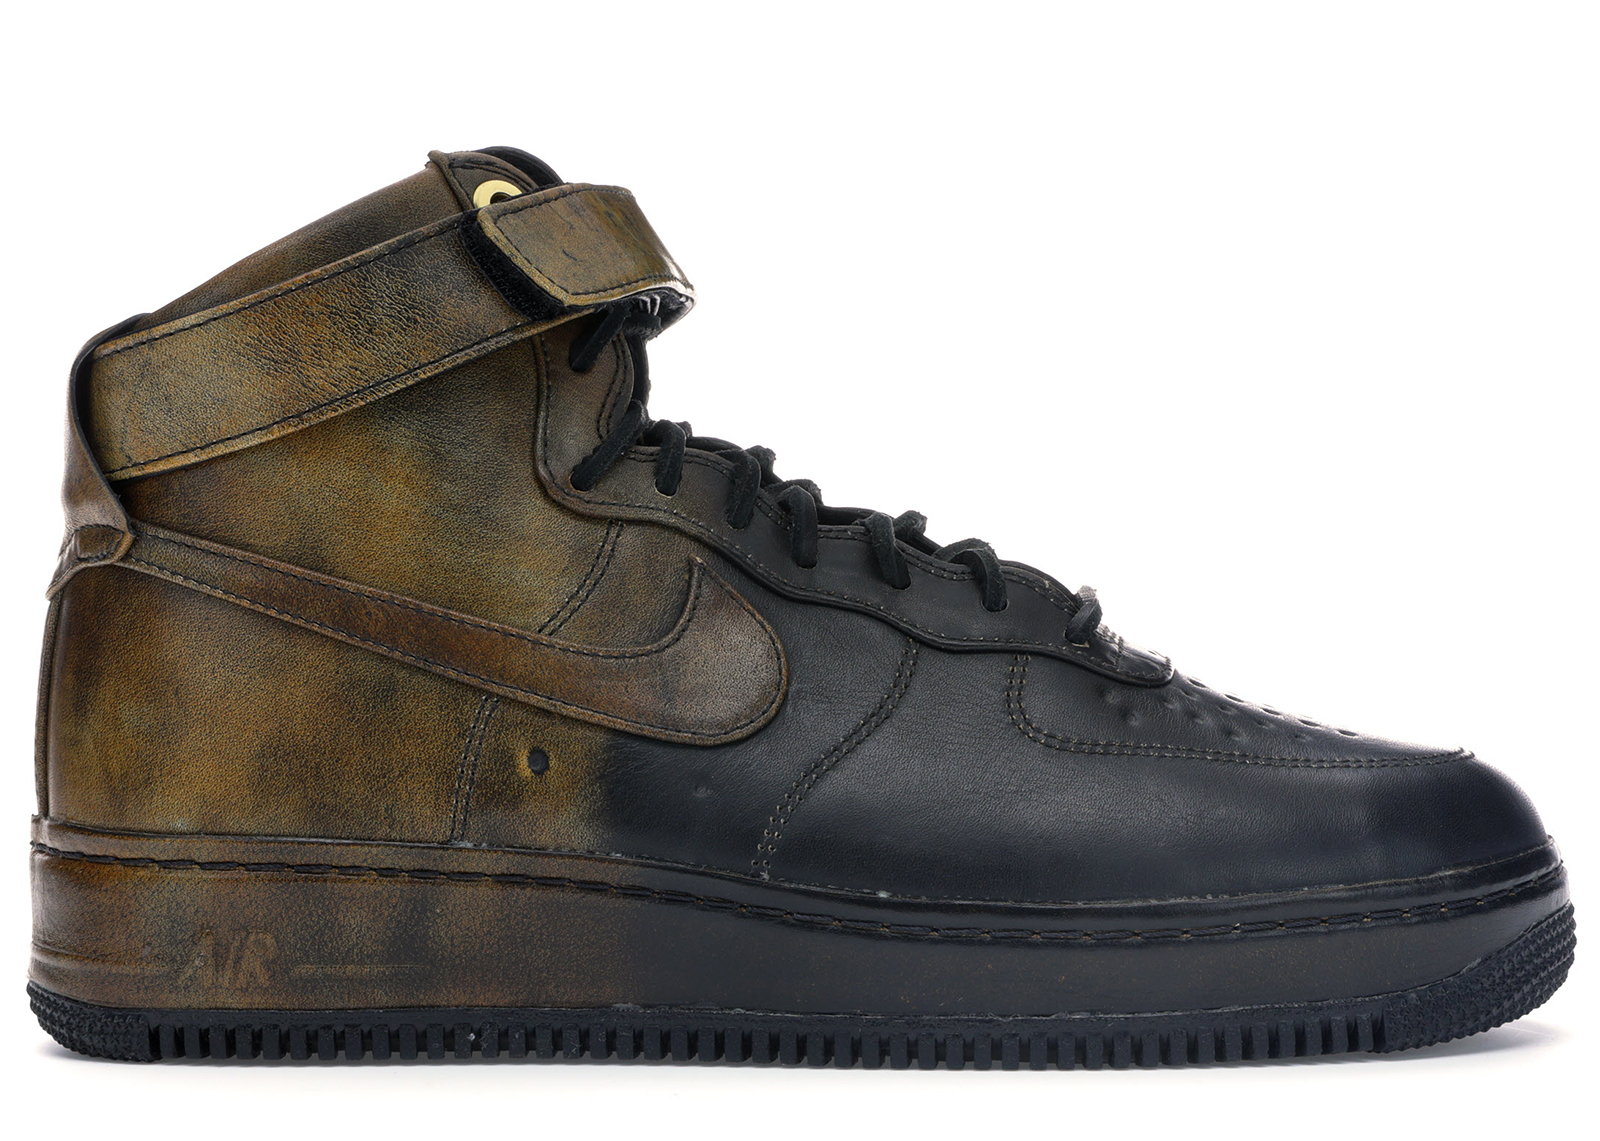 Nike Air Force 1 High Pigalle Black 